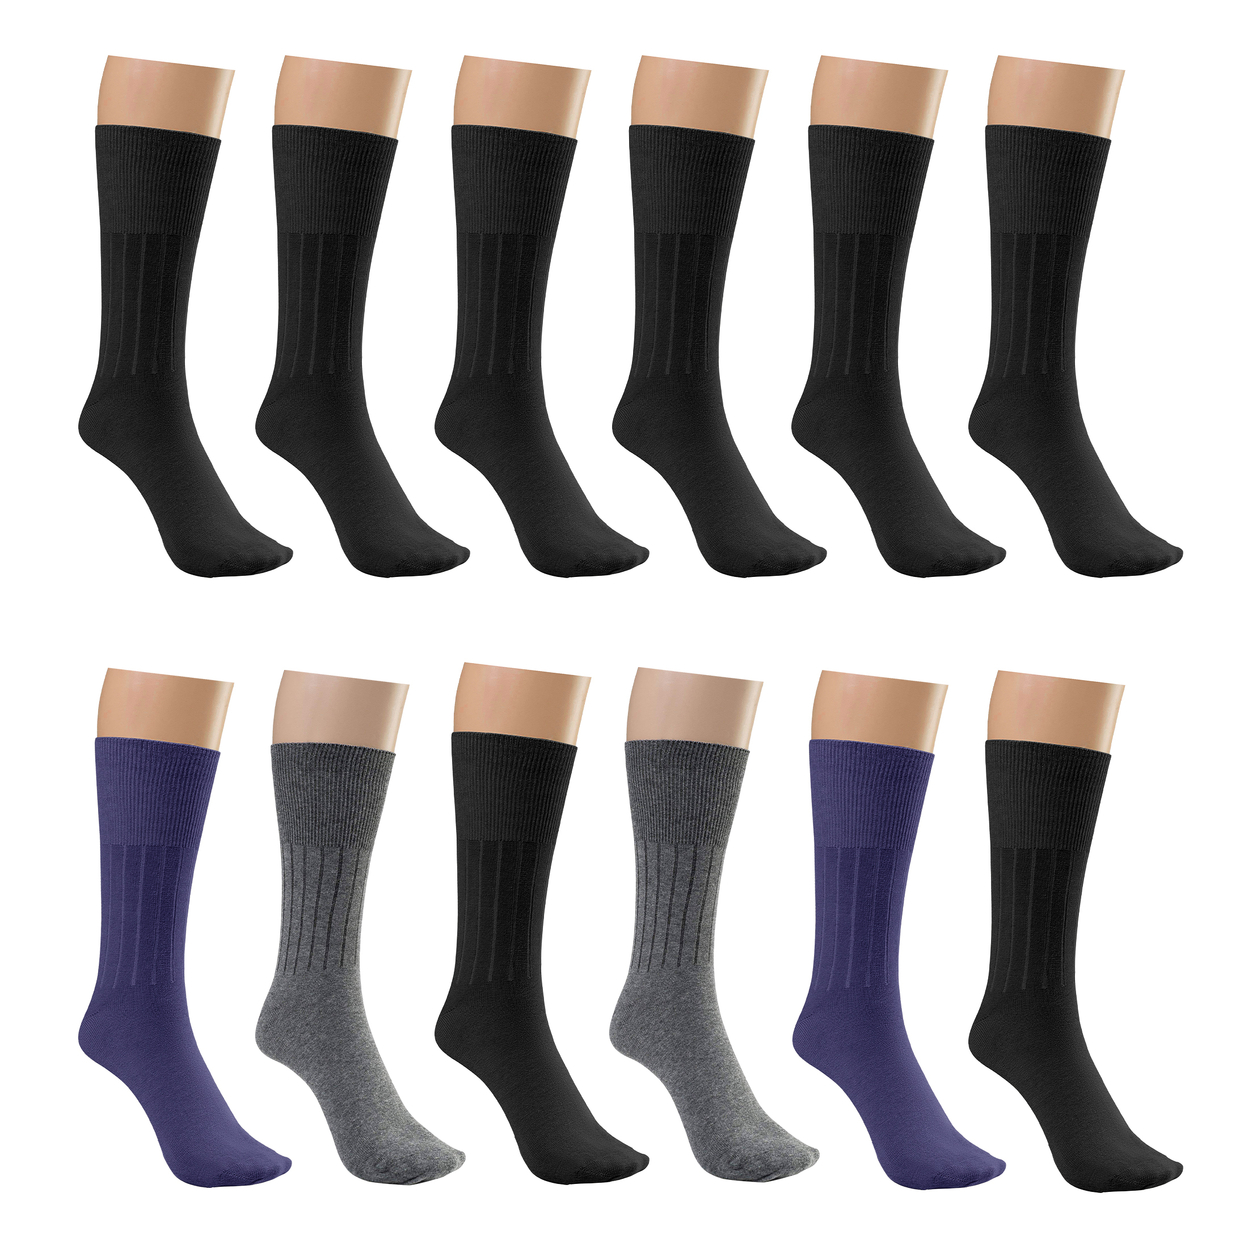 6-Pairs: Physician Approved Non-Binding Diabetic Circulatory Comfortable Moisture Wicking Dress Socks - Assorted